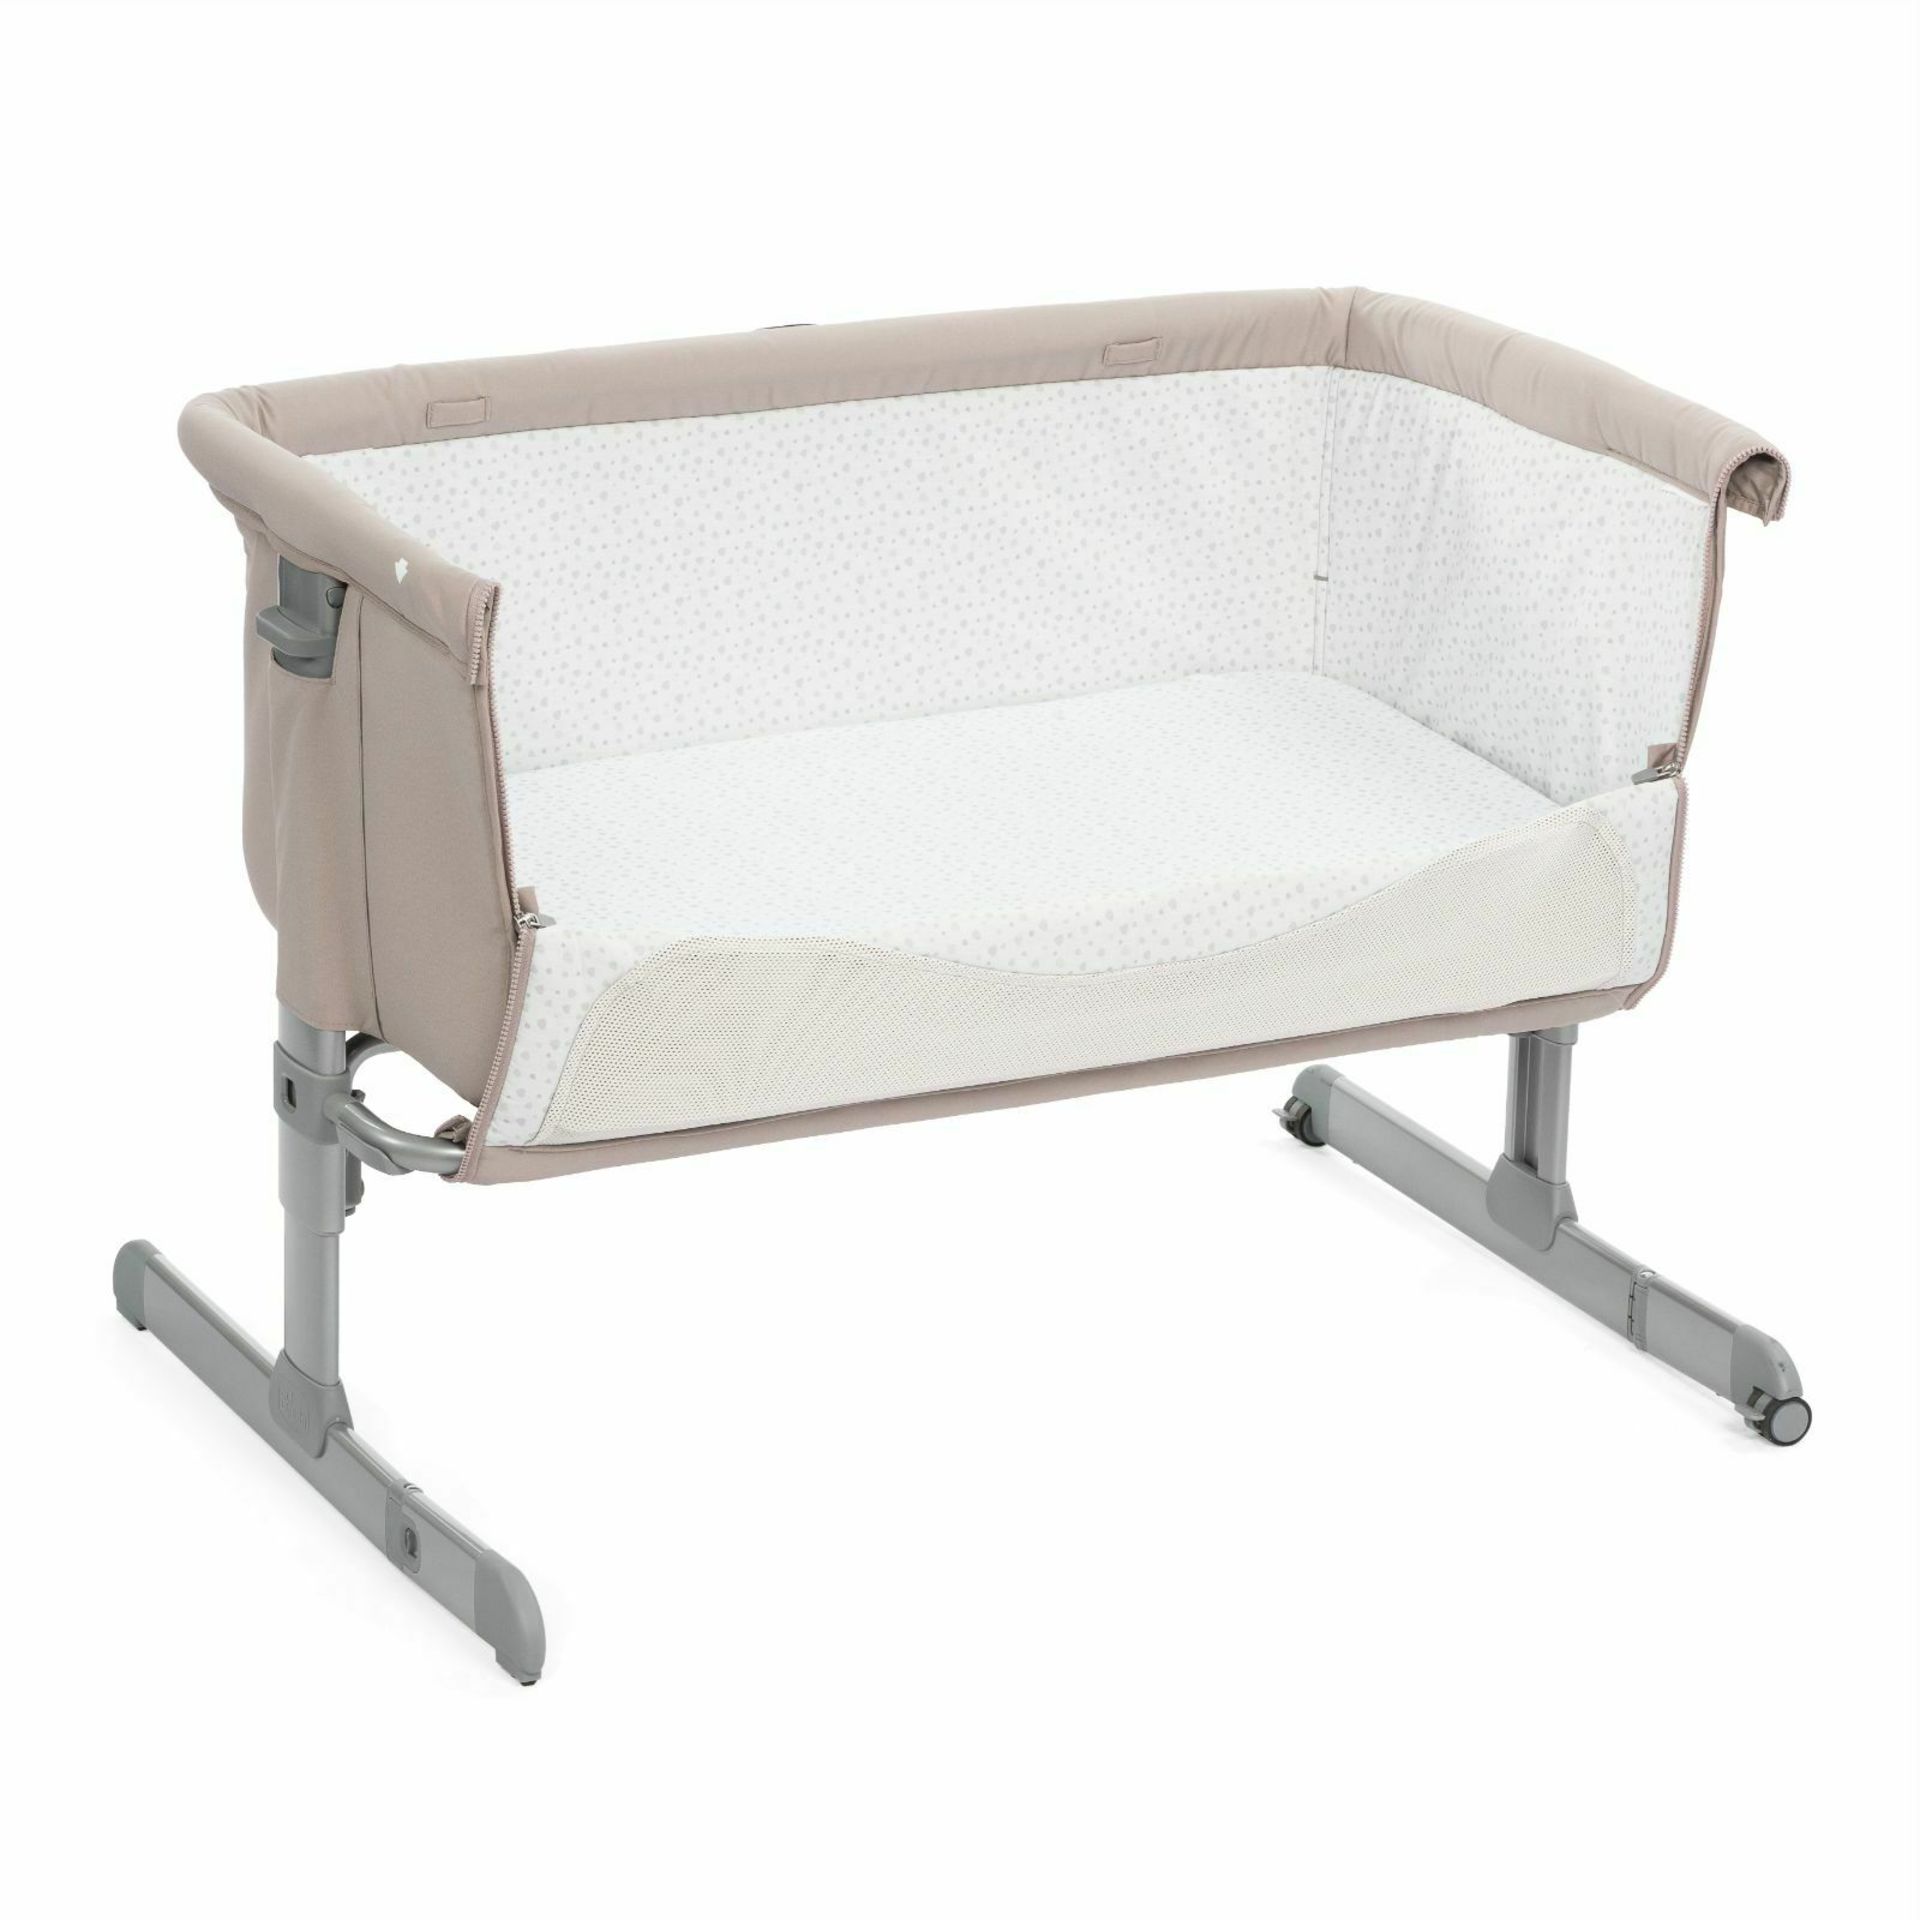 chicco next 2 me side sleeping bedside crib with mesh window rrp £299 - Image 3 of 4